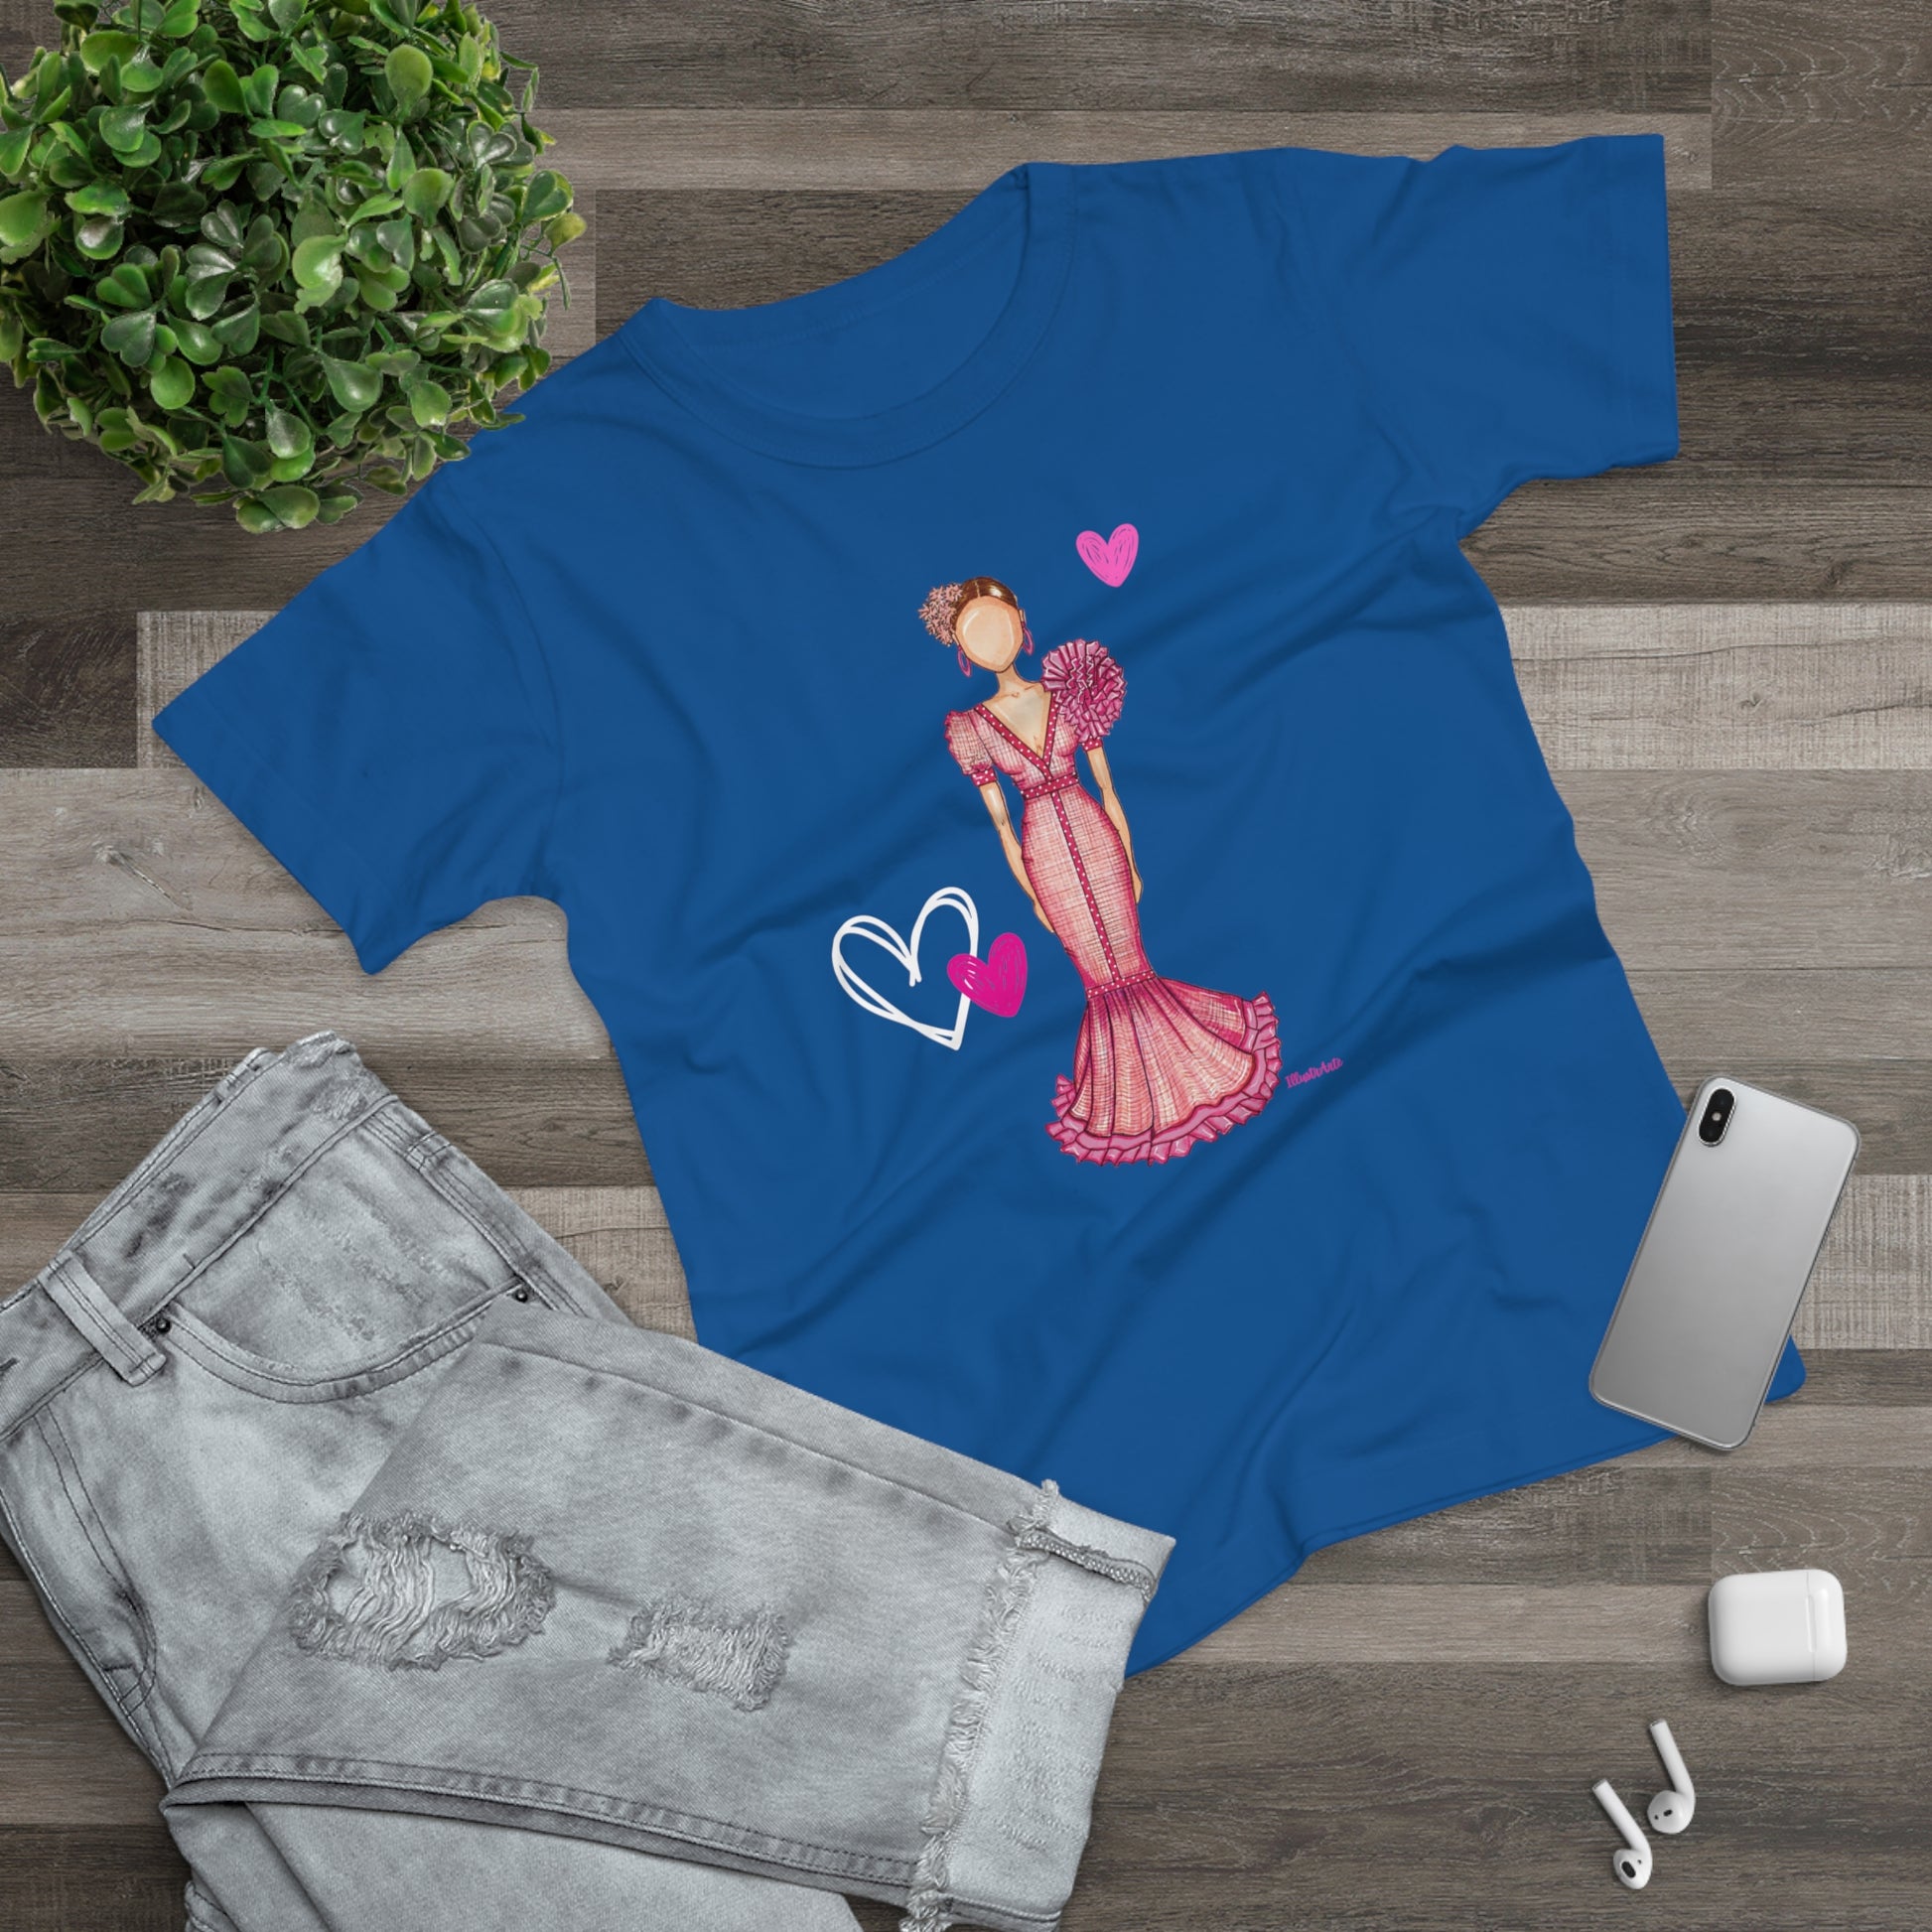 a blue t - shirt with a picture of a woman holding a heart